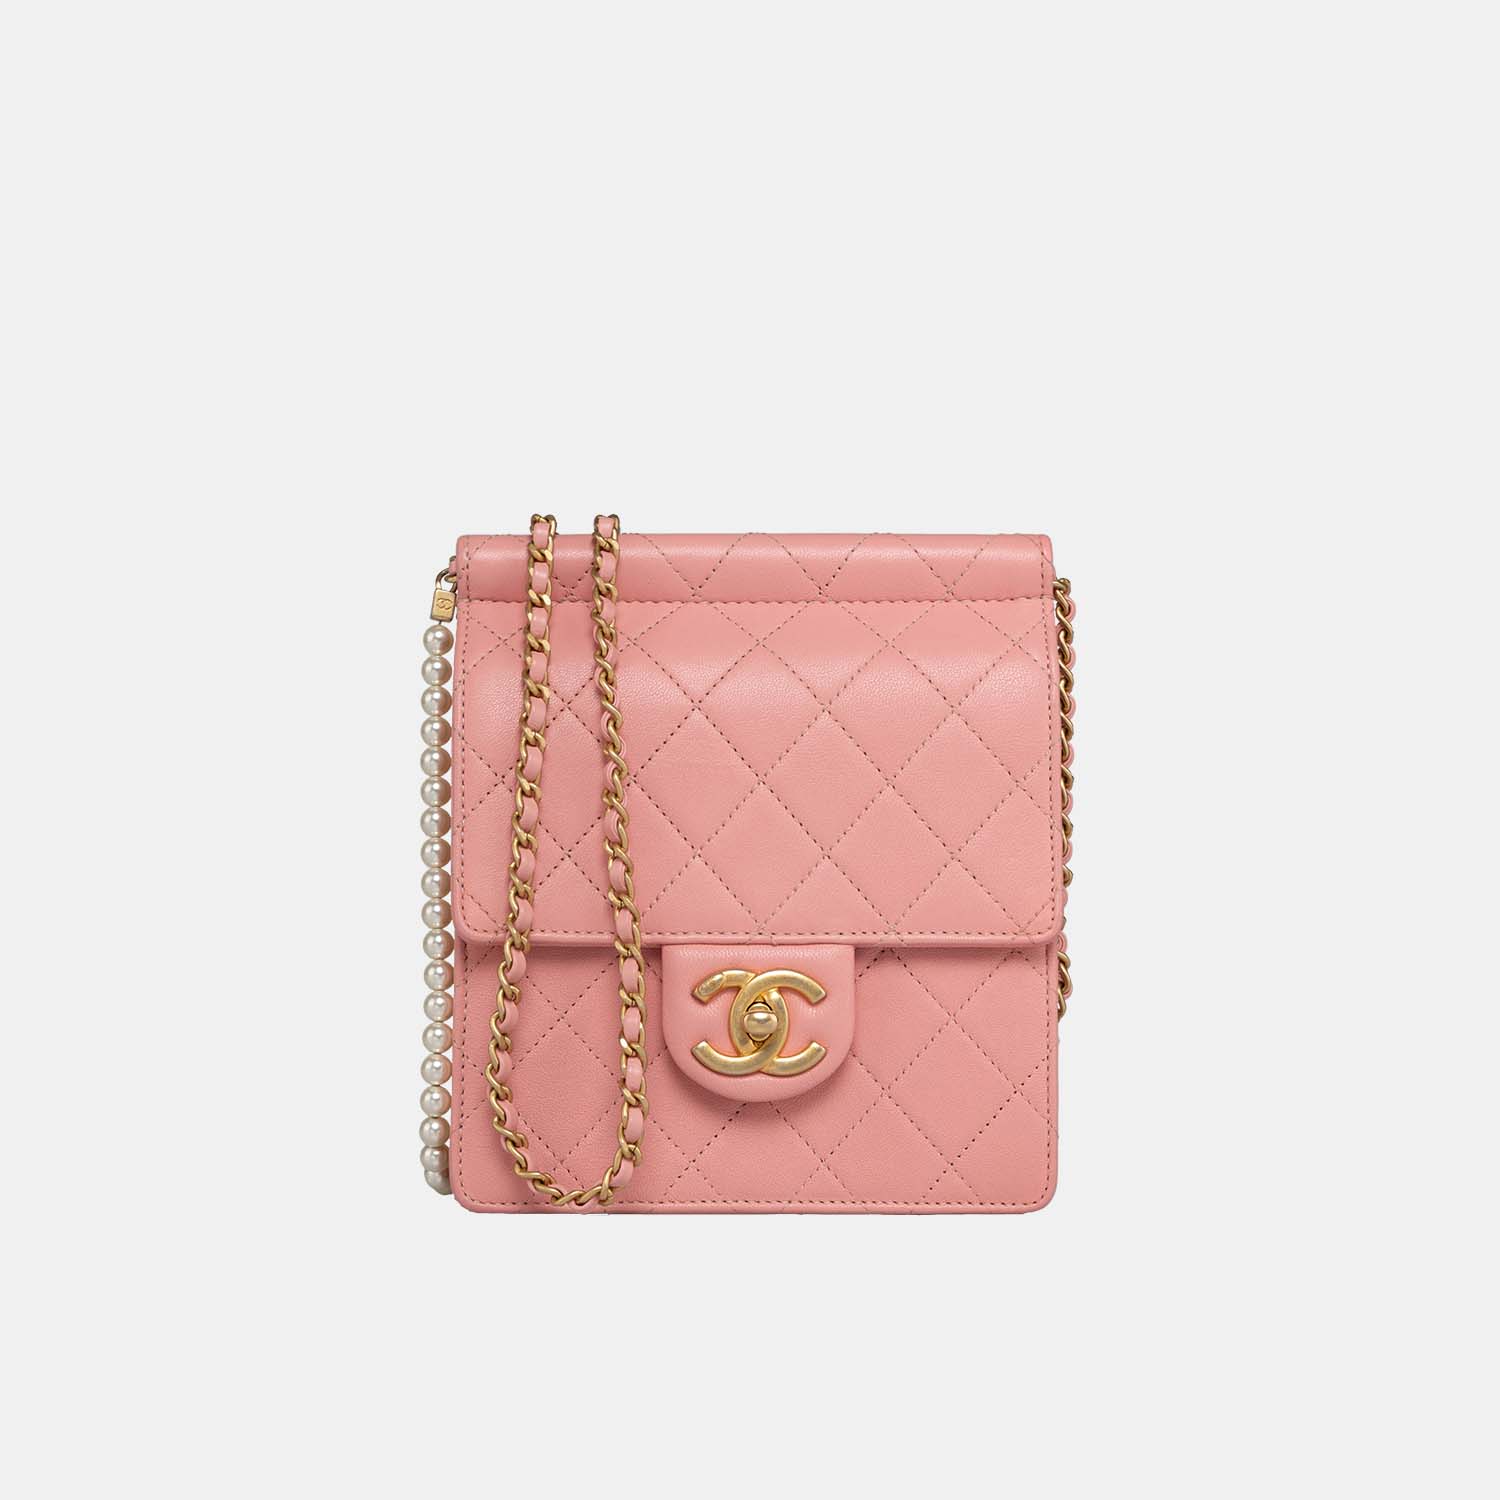 Chanel Pink Vertical Pearls Clutch with Chic Pearl Chain and Gold